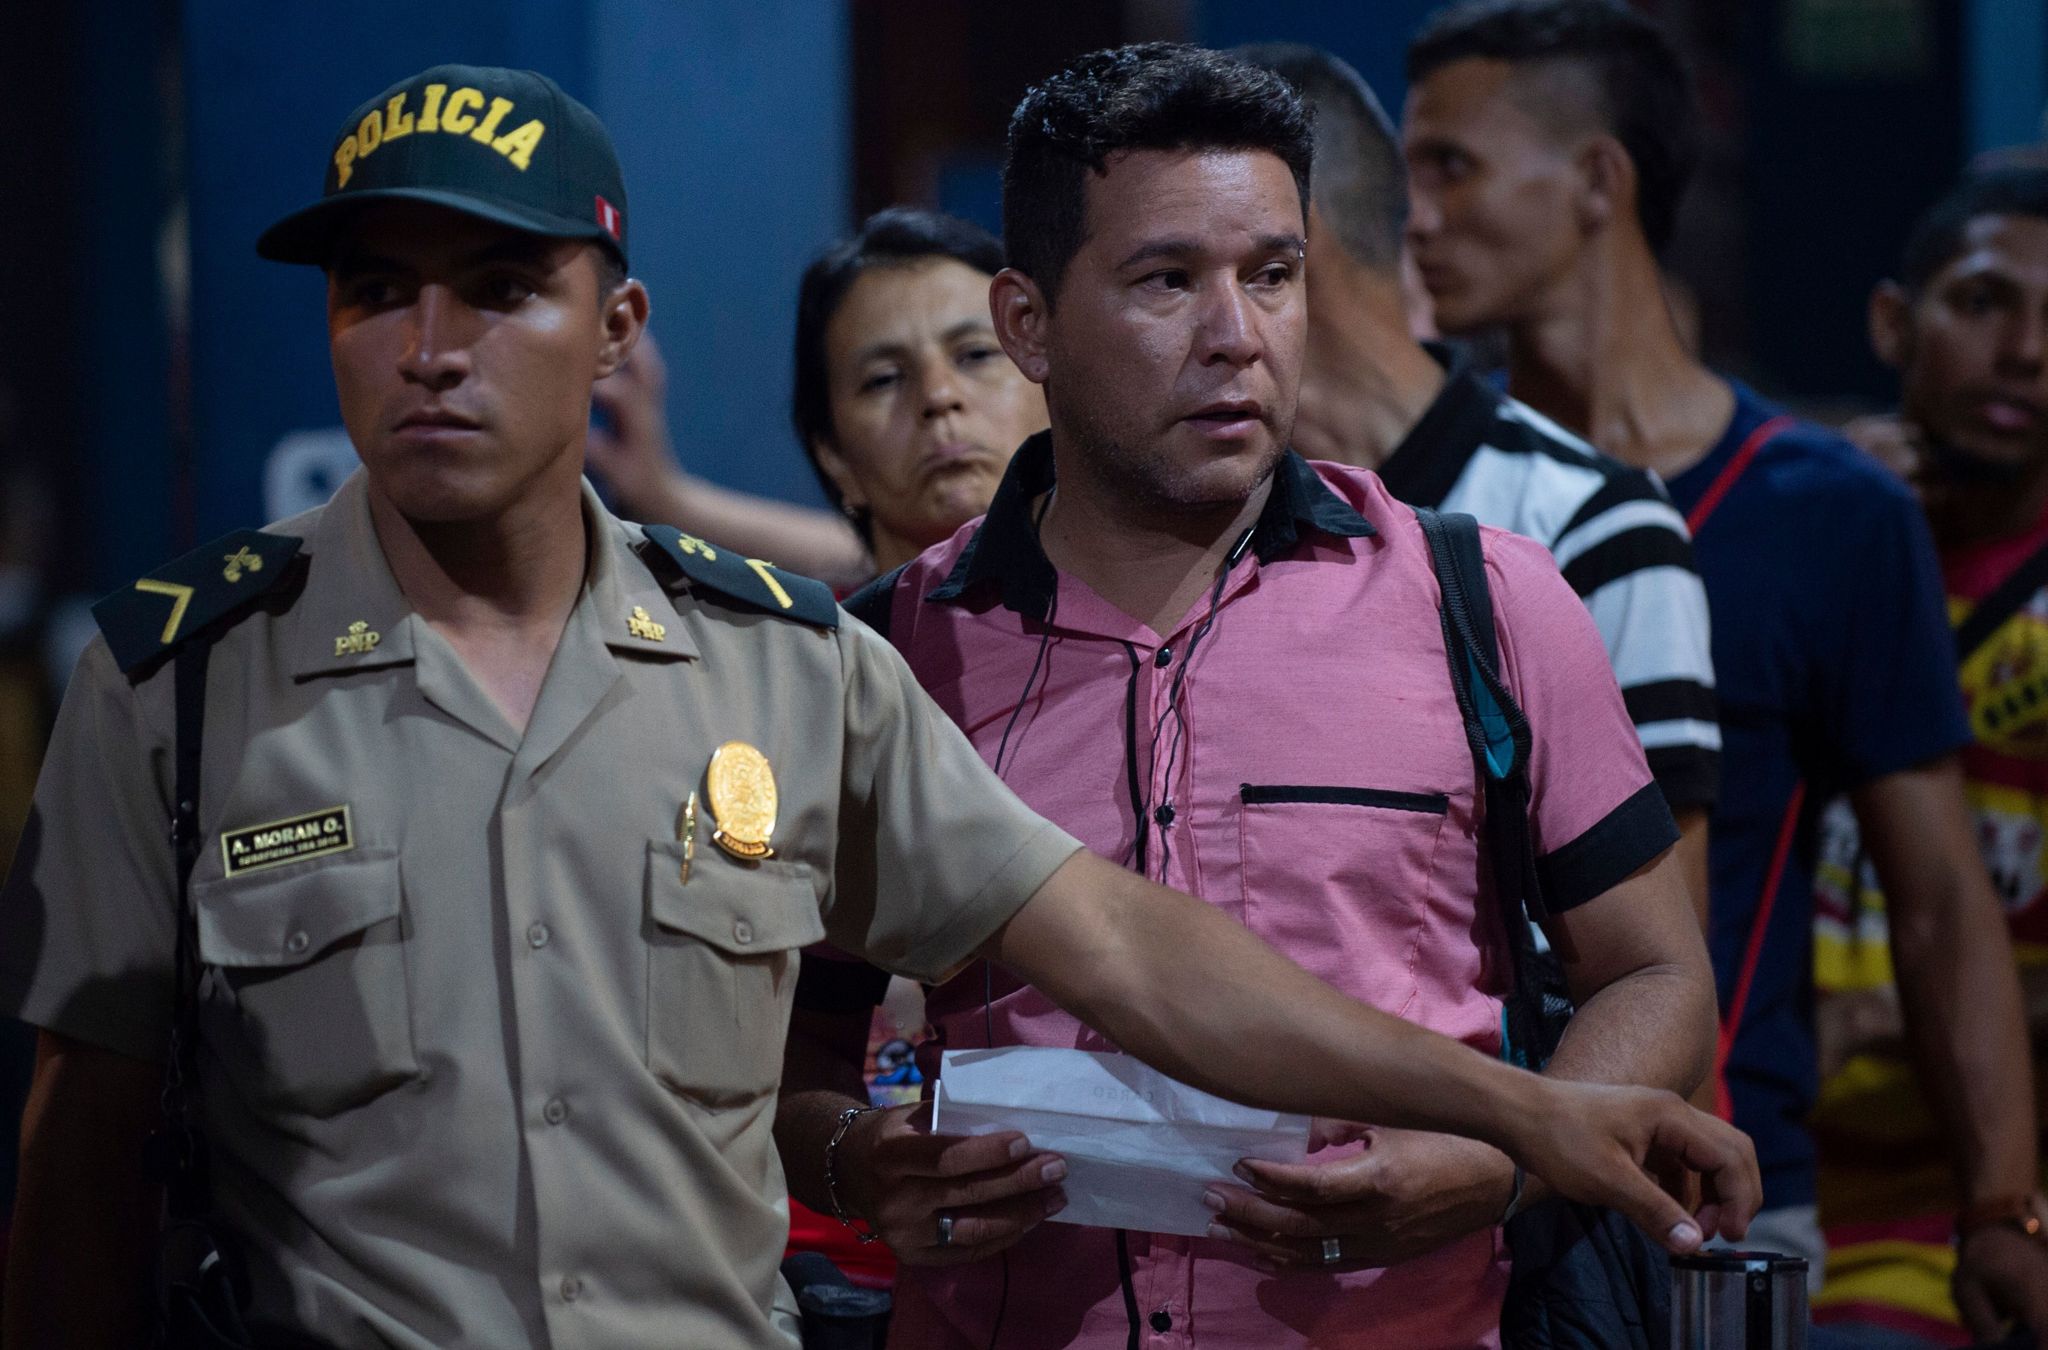 A Peruvian policeman assists Venezuelan citizens waiting in line to get a refugee application at a Peruvian border post at the binational border attention centre (CEBAF) in Tumbes on June 14, 2019.